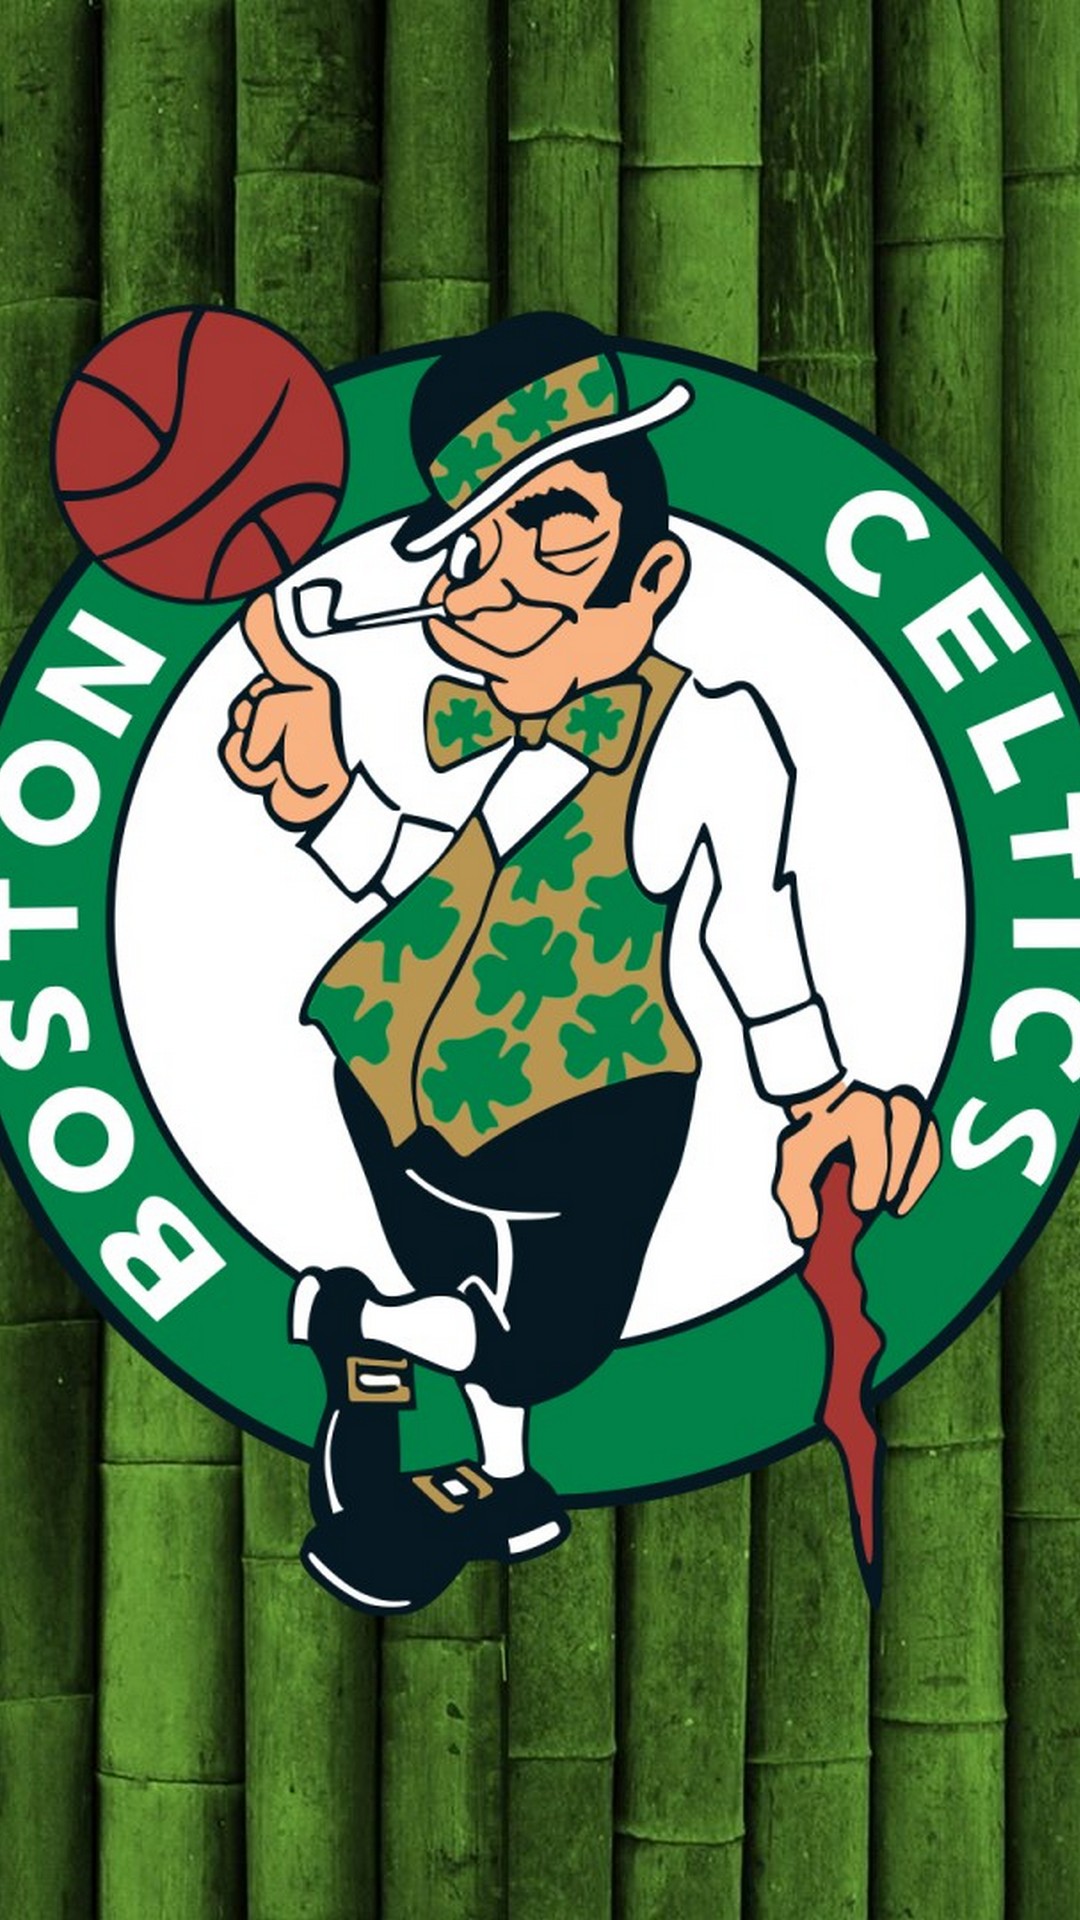 iPhone X Wallpaper Boston Celtics with resolution 1080X1920 pixel. You can make this wallpaper for your iPhone 5, 6, 7, 8, X backgrounds, Mobile Screensaver, or iPad Lock Screen